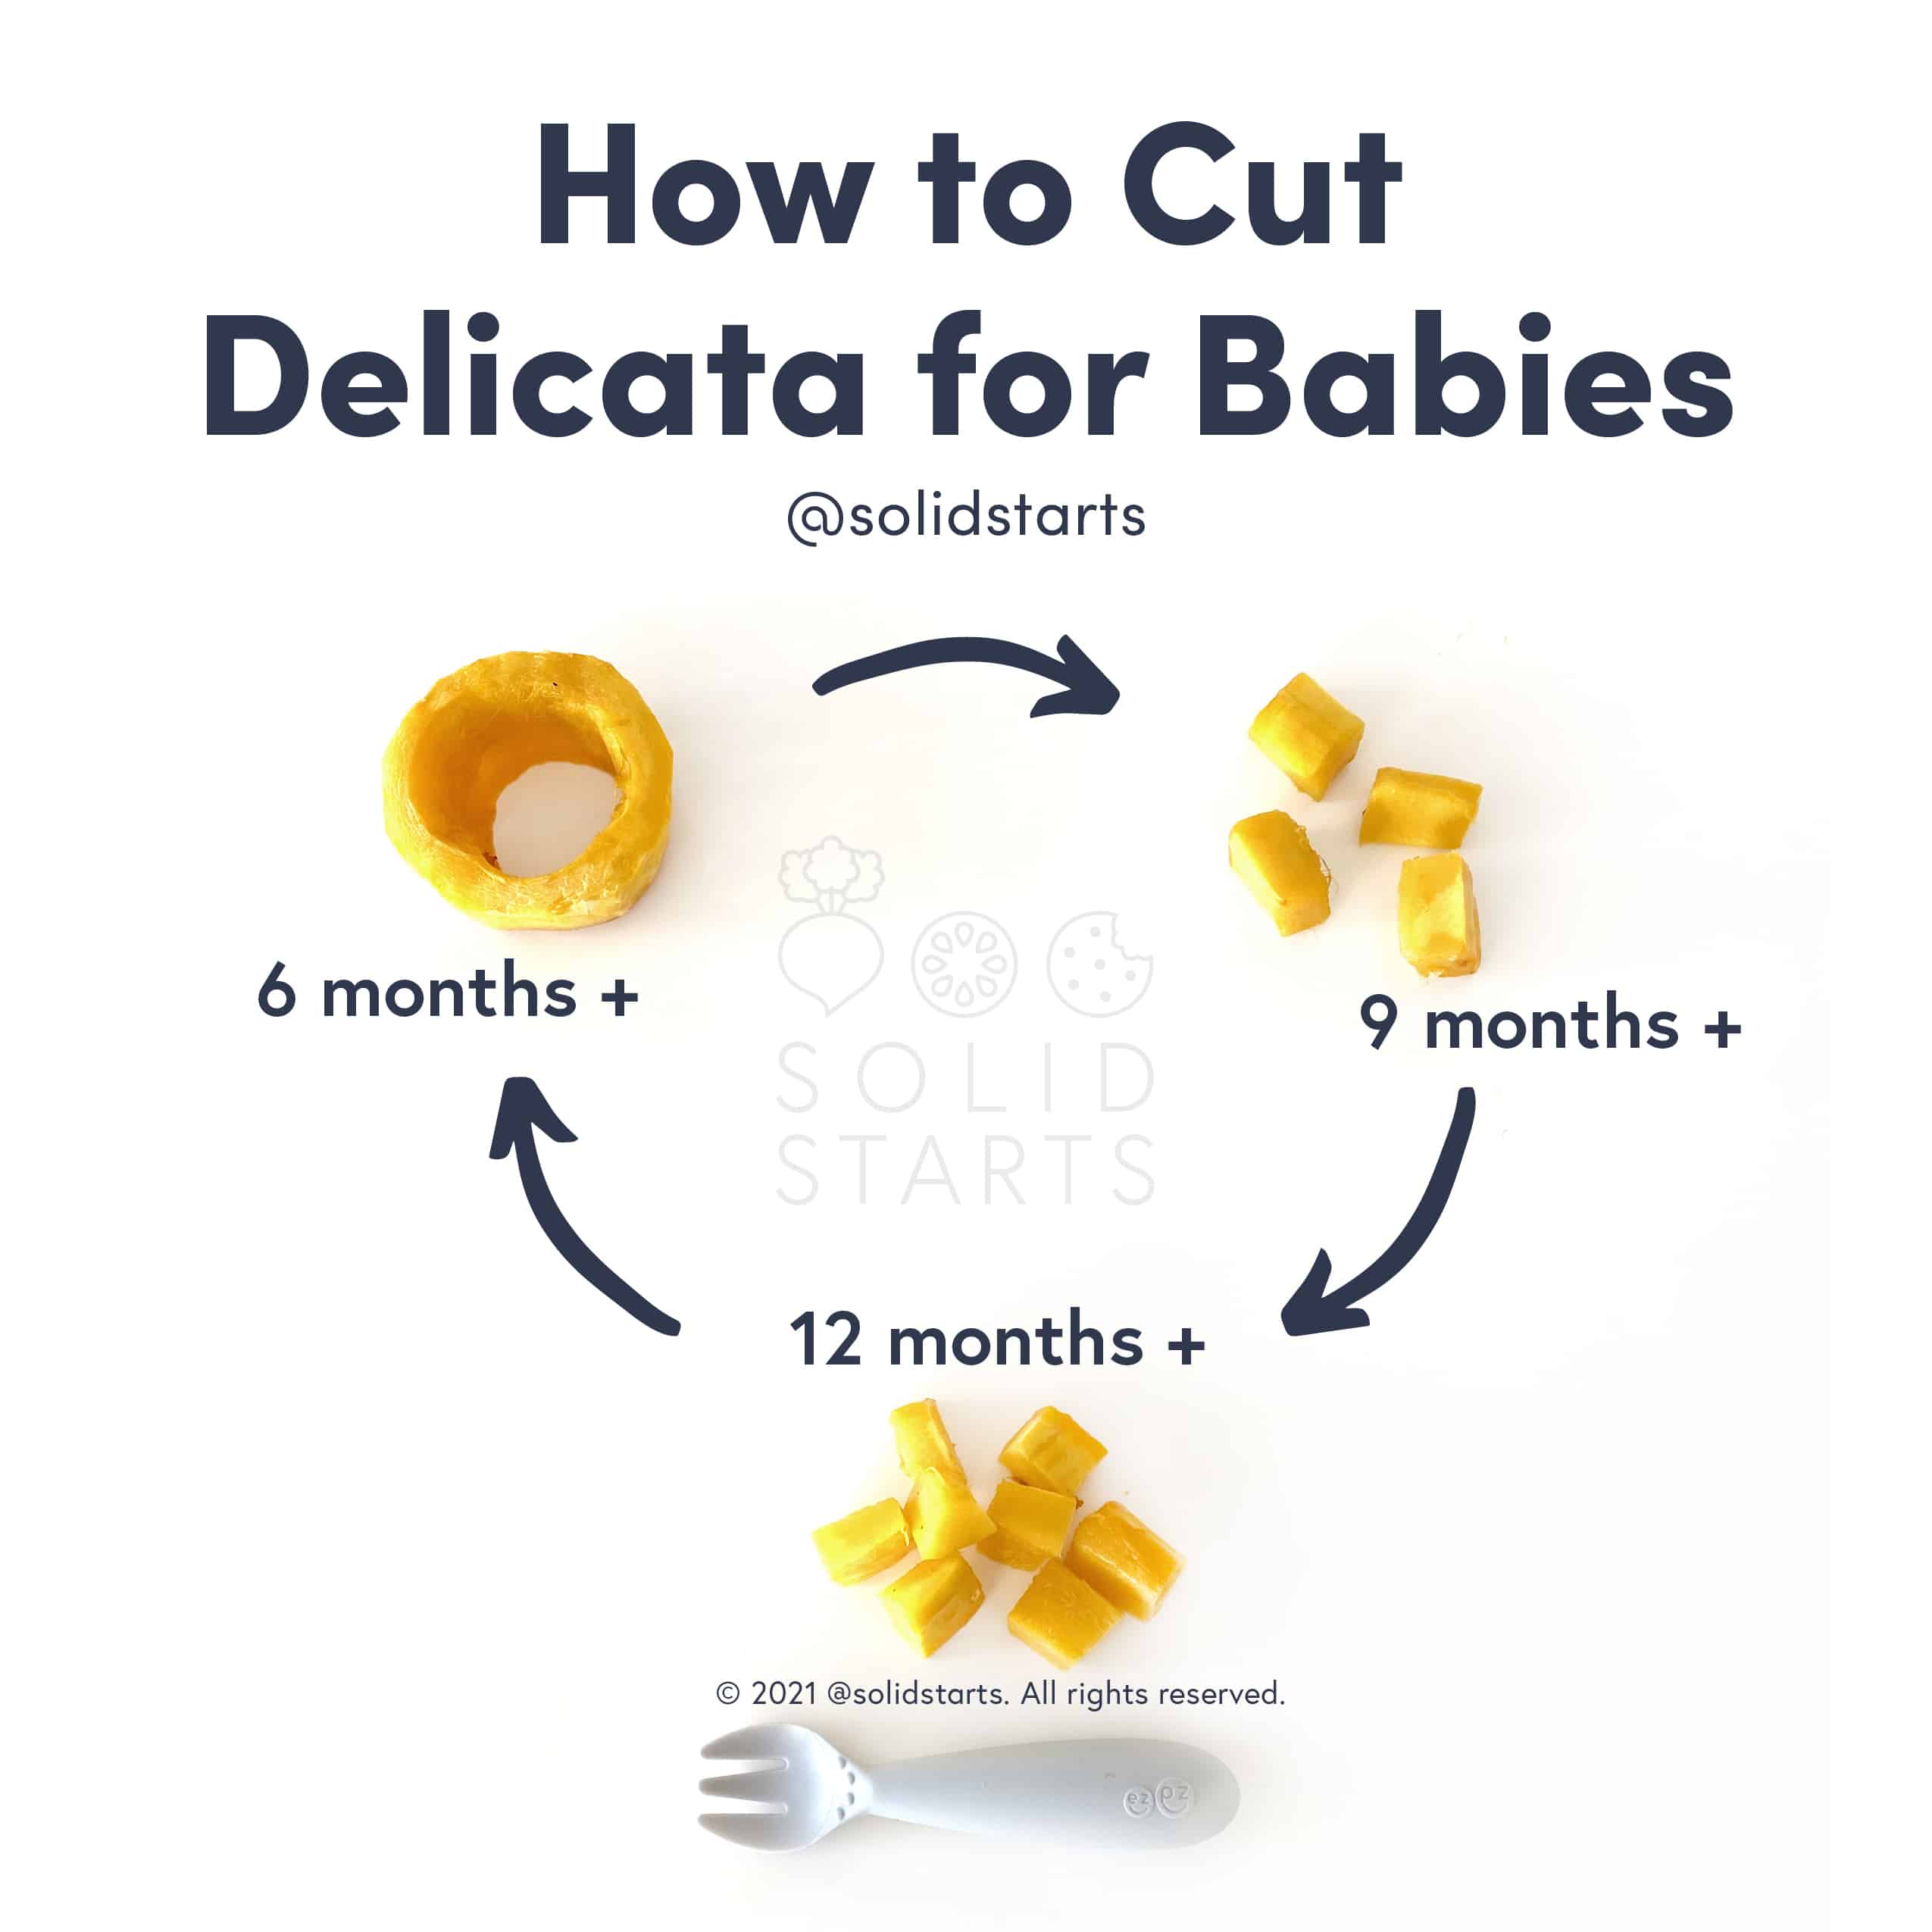 How to Cut Delicata for Babies